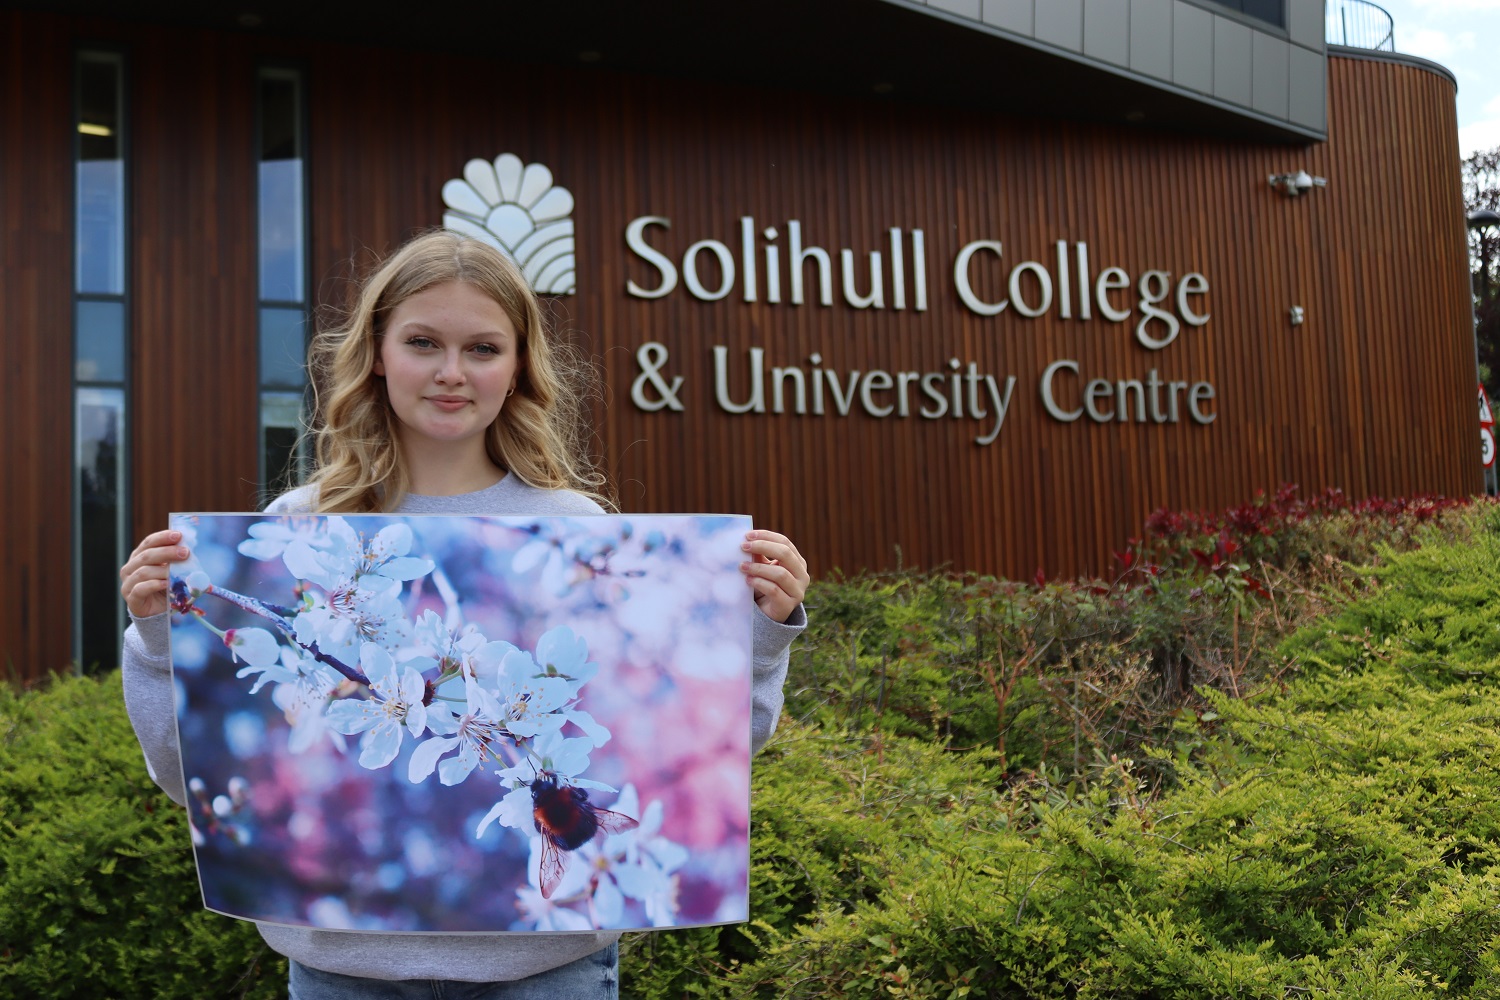 Hattie with a previous competition entry winning shot from another occasion stood outside the college